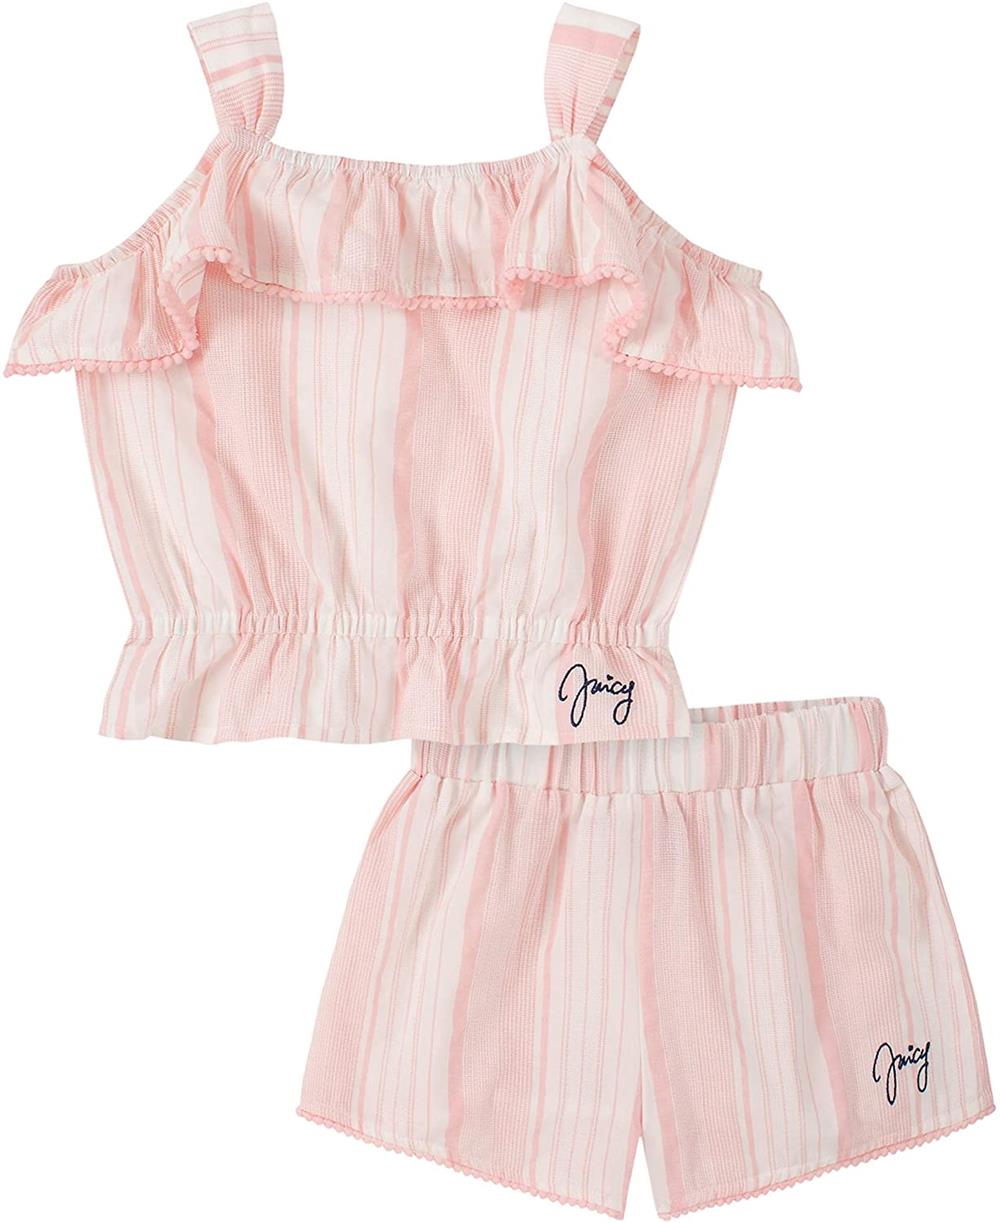 Juicy Couture Girls 12-24 Months Pom Ruffle Short Set